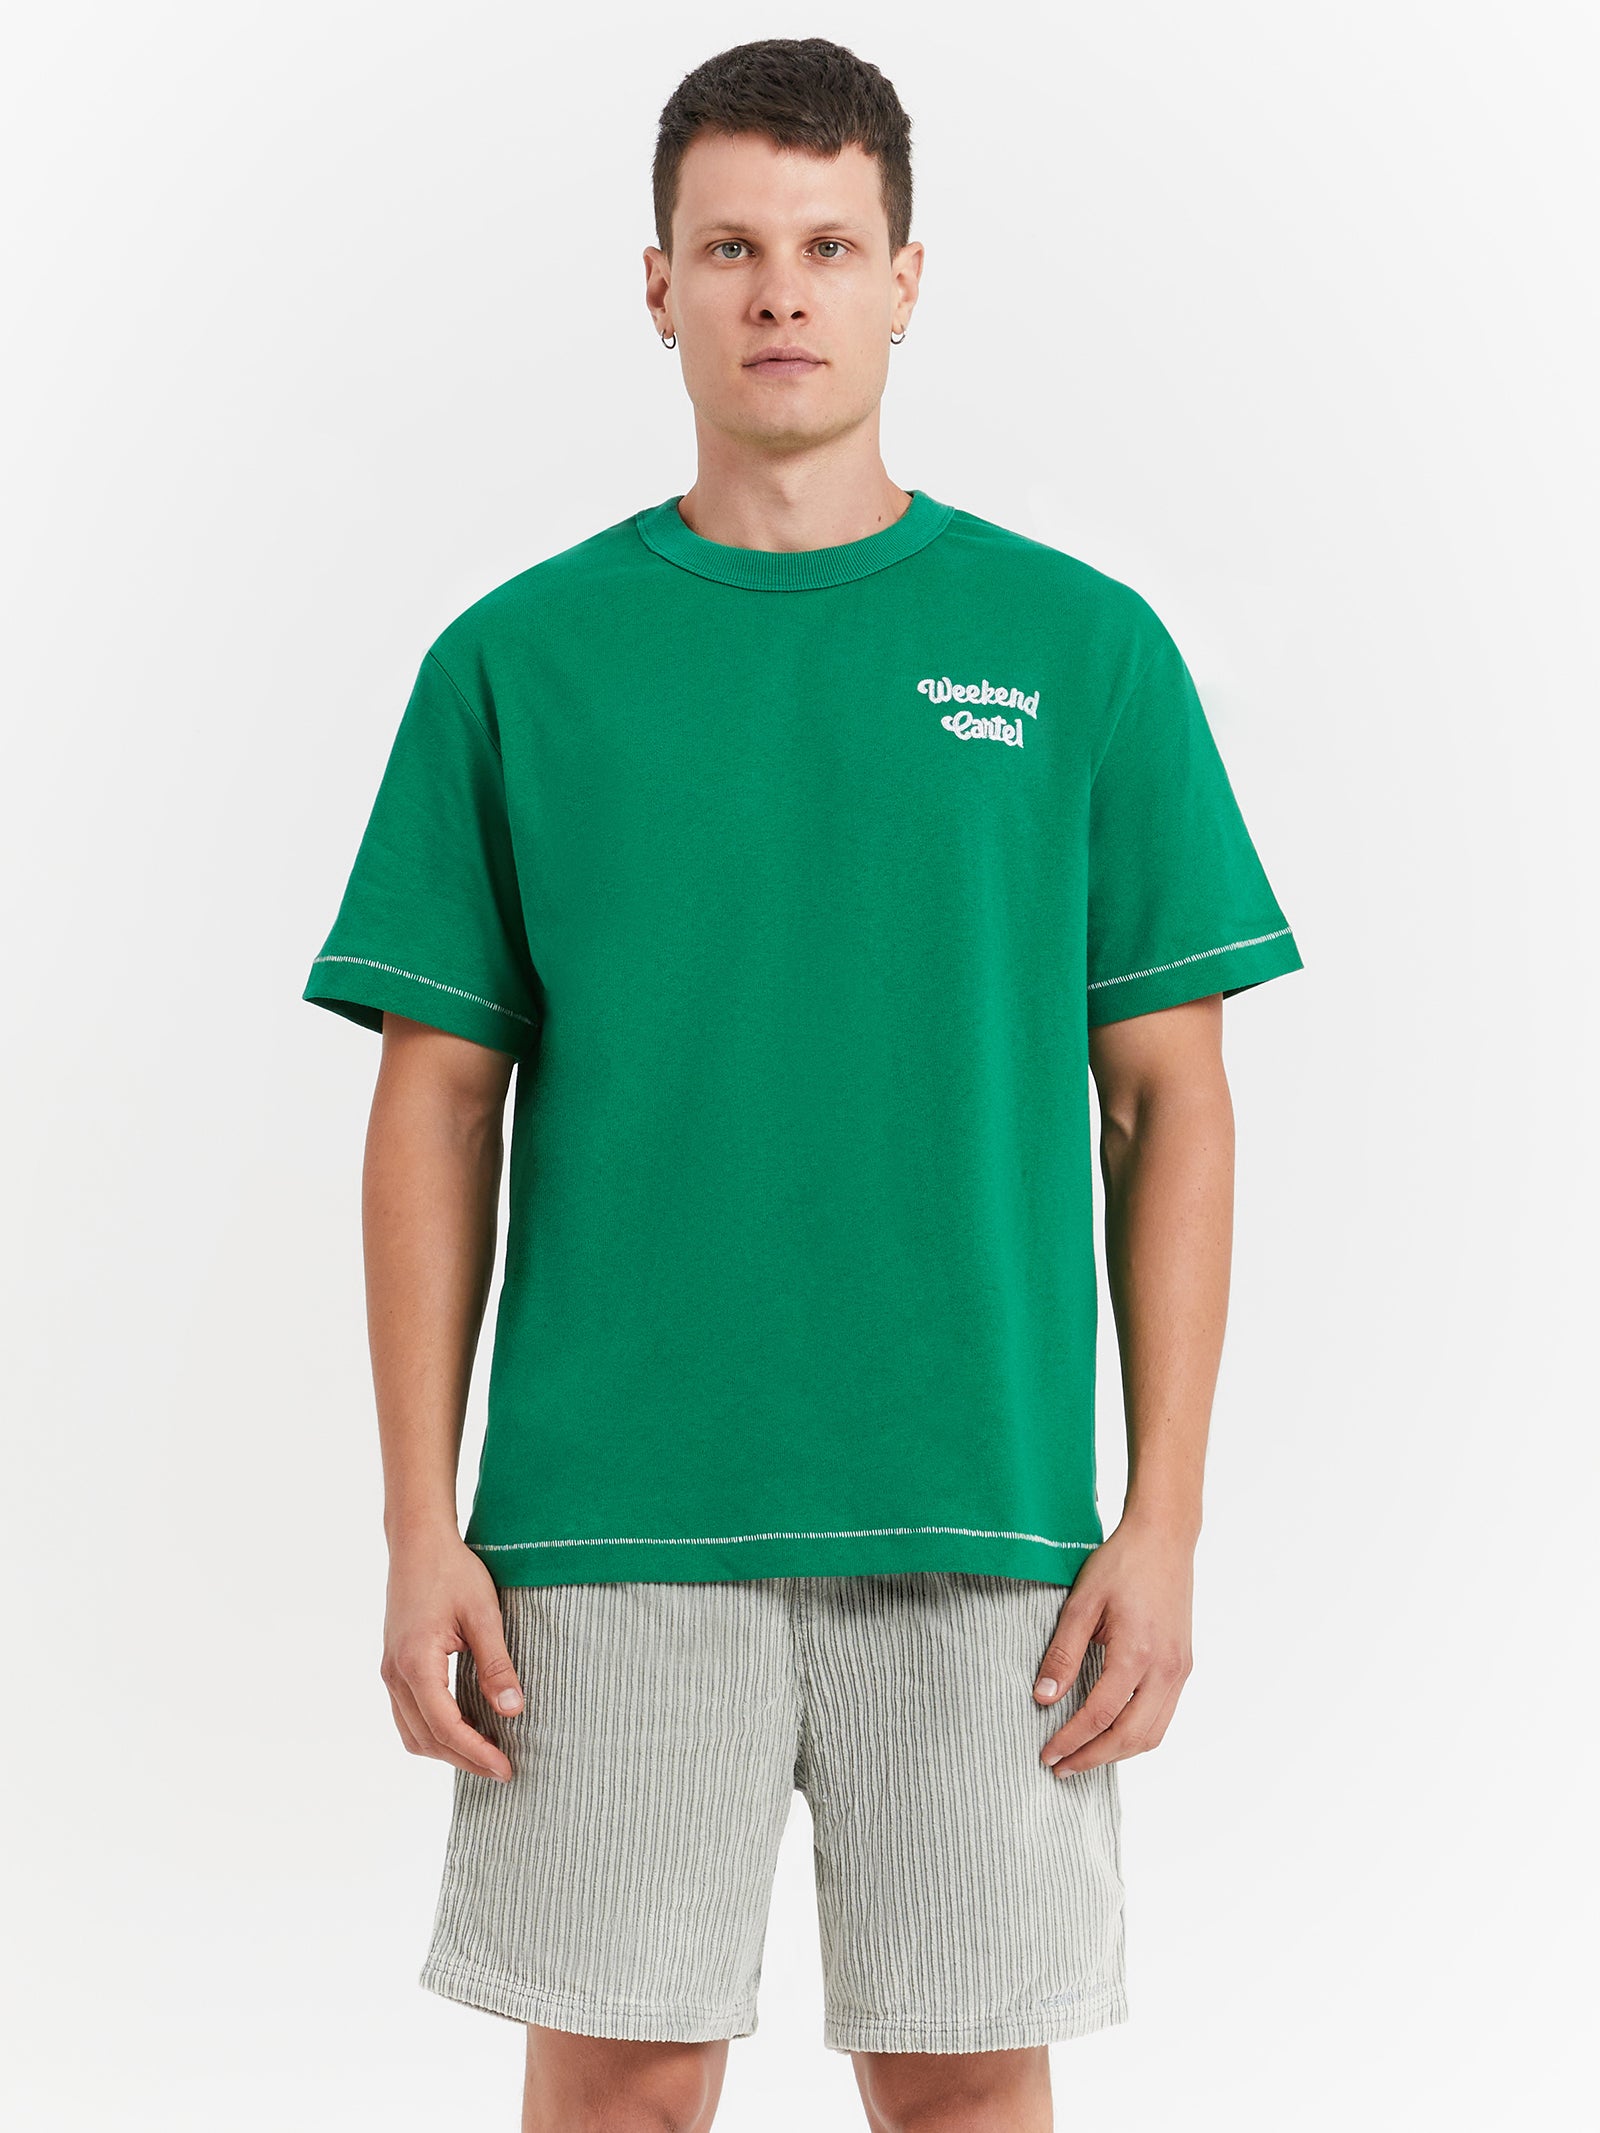 Saloon T-Shirt in Forest